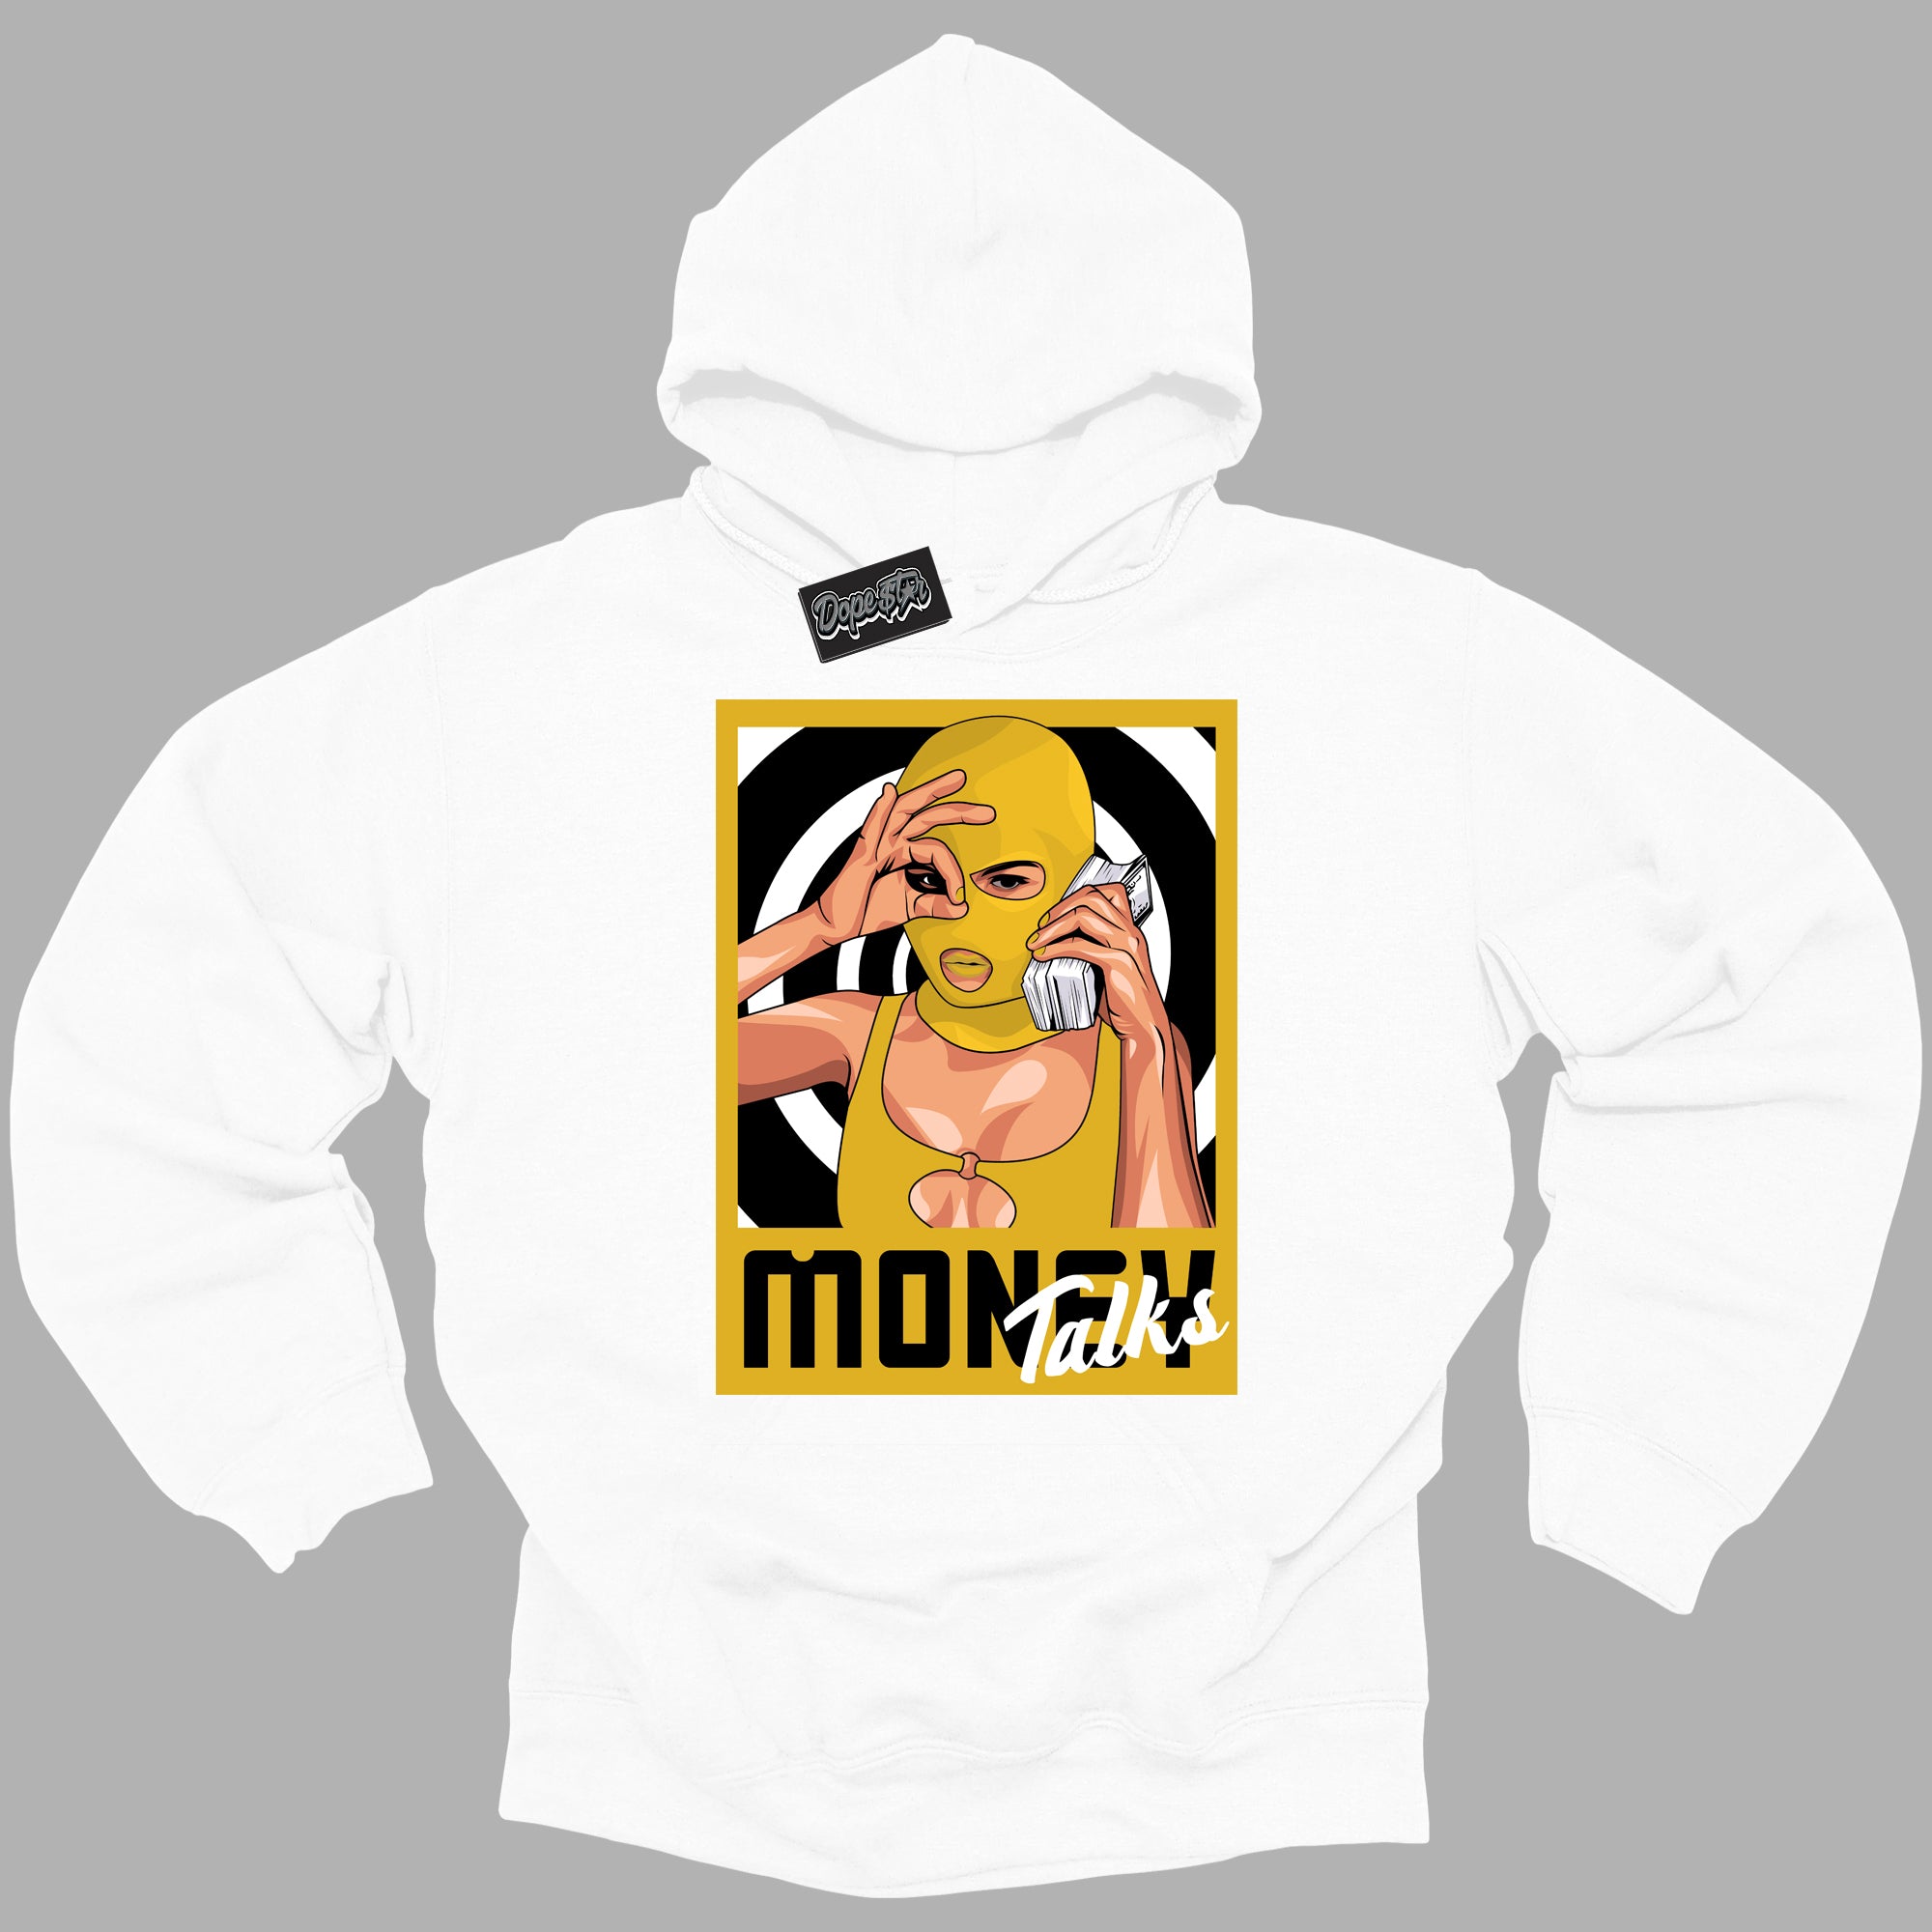 Cool White Hoodie with “ Money Talks ”  design that Perfectly Matches Yellow Ochre 6s Sneakers.